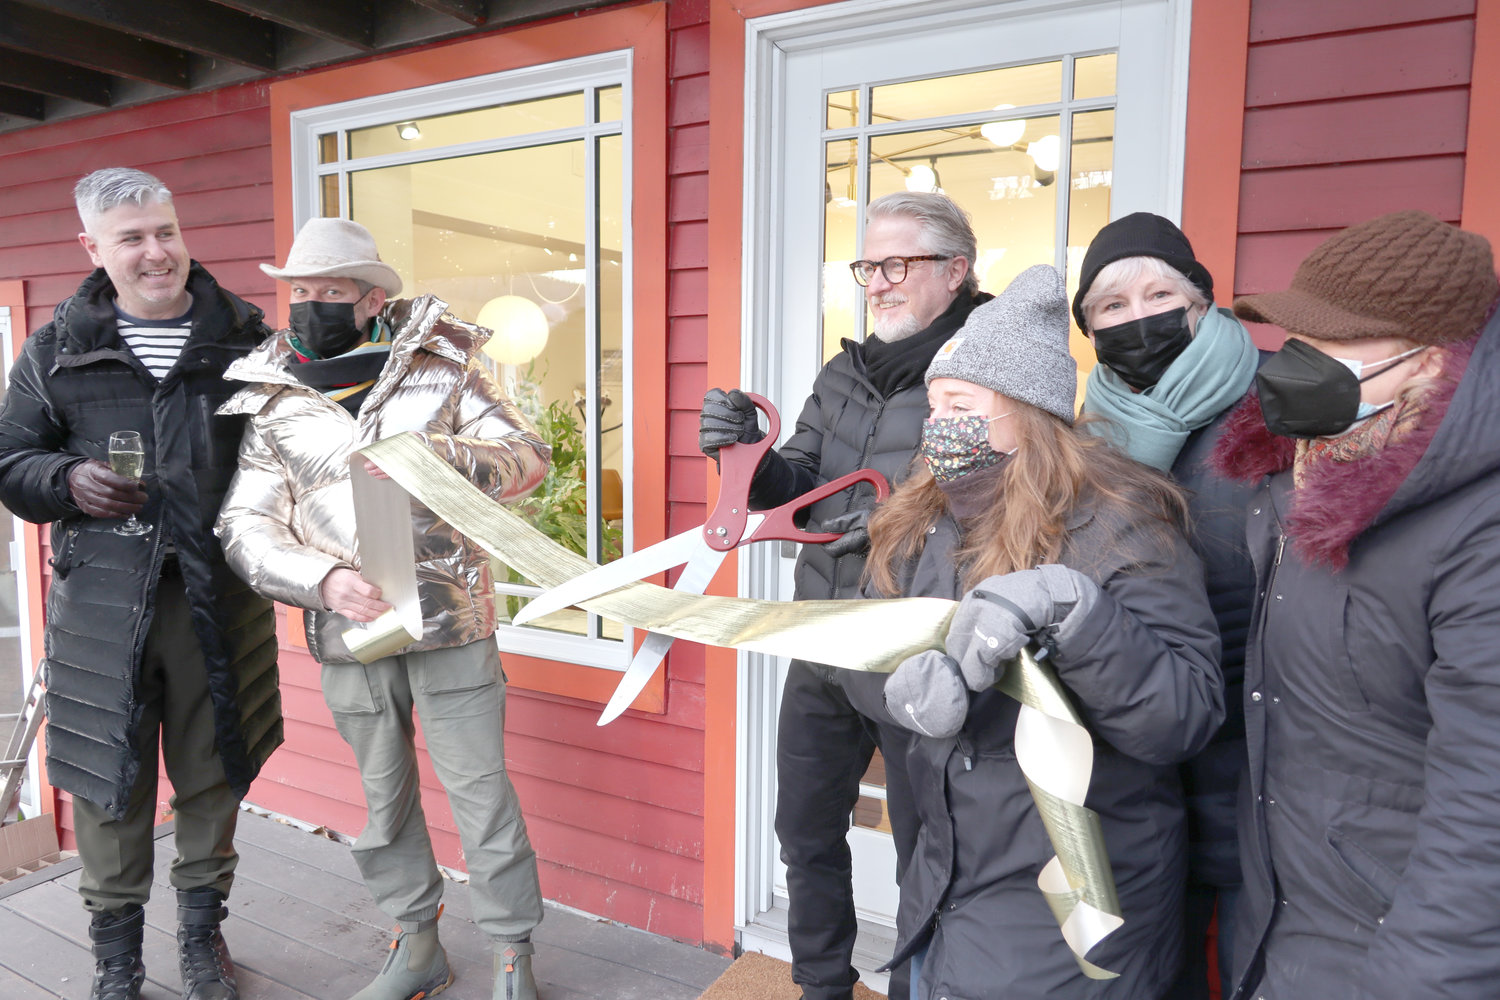 Johnny Pizzolato,  left, Roswell Hamerick, Laura Burrell, Mary Jones-Mellett and Nonna Hall hold the ribbon as Keith Nicholson cuts it and becomes Barryville's latest small-business proprietor on January 15.